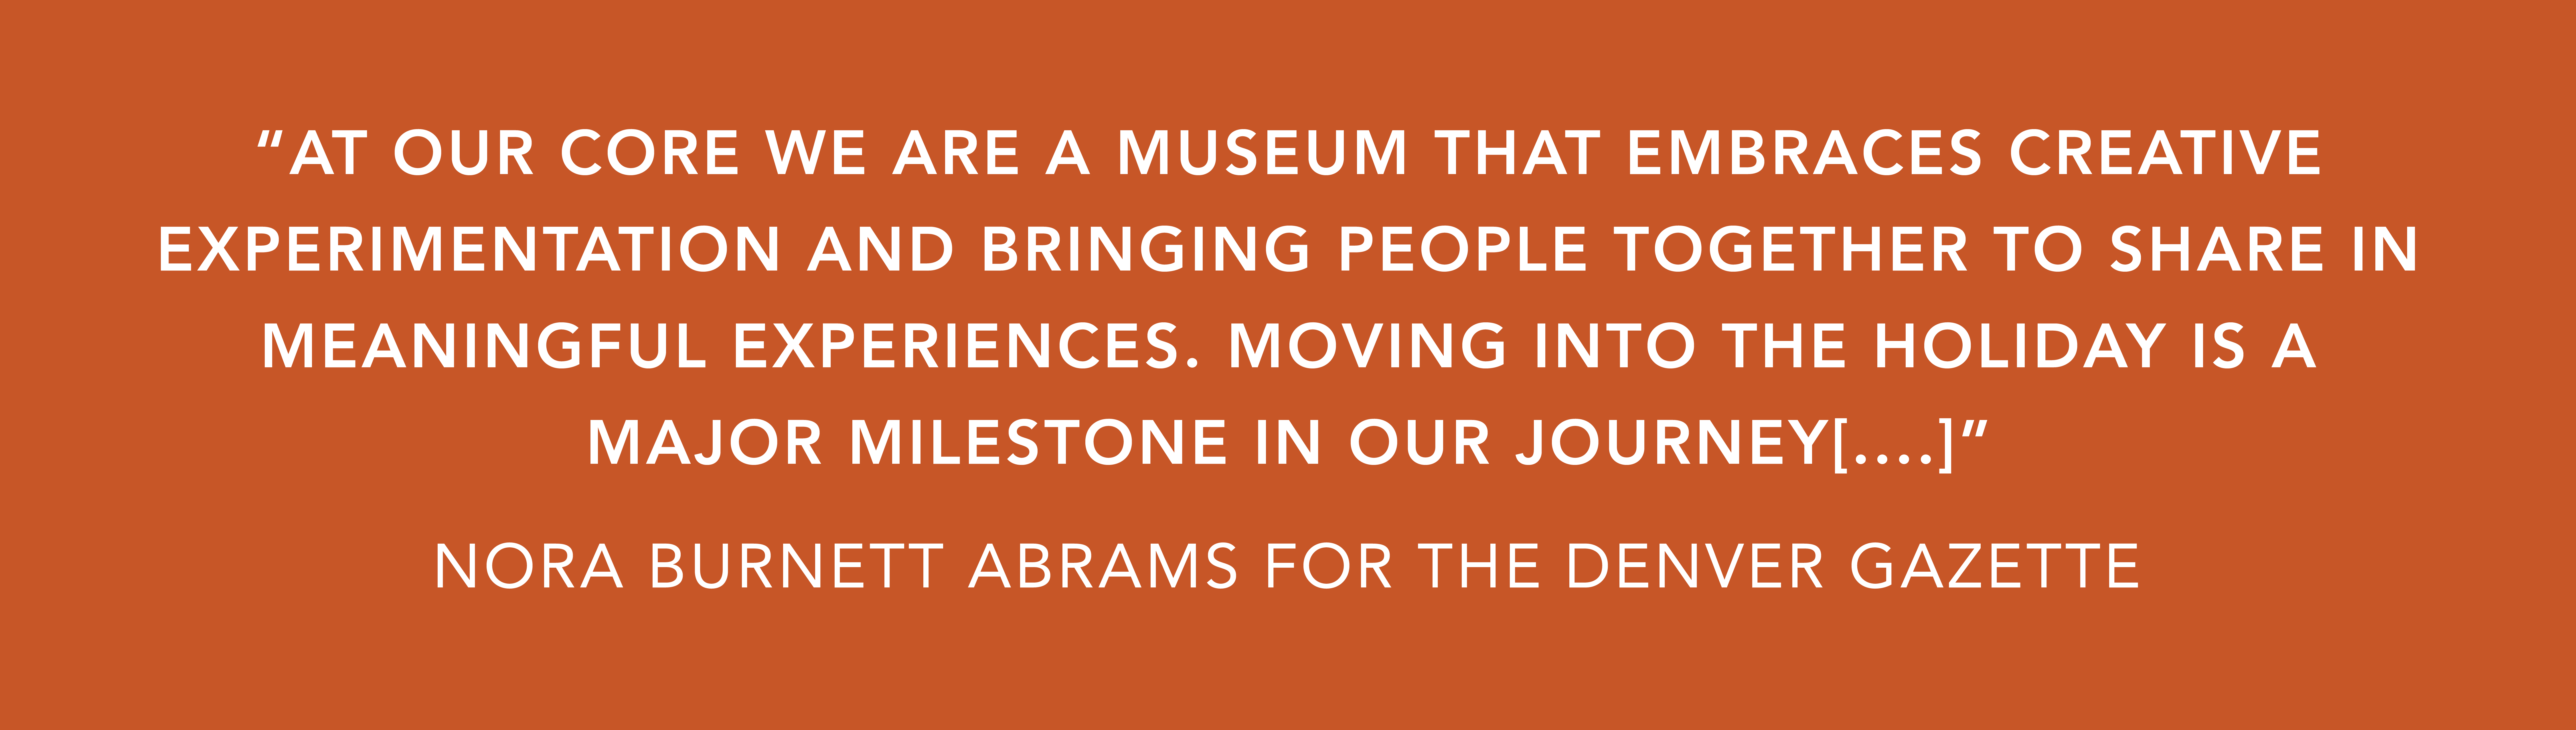 White text on an orange background that reads, “AT OUR CORE WE ARE A MUSEUM THAT EMBRACES CREATIVE EXPERIMENTATION AND BRINGING PEOPLE TOGETHER TO SHARE IN MEANINGFUL EXPERIENCES. MOVING INTO THE HOLIDAY IS A MAJOR MILESTONE IN OUR JOURNEY[....]"